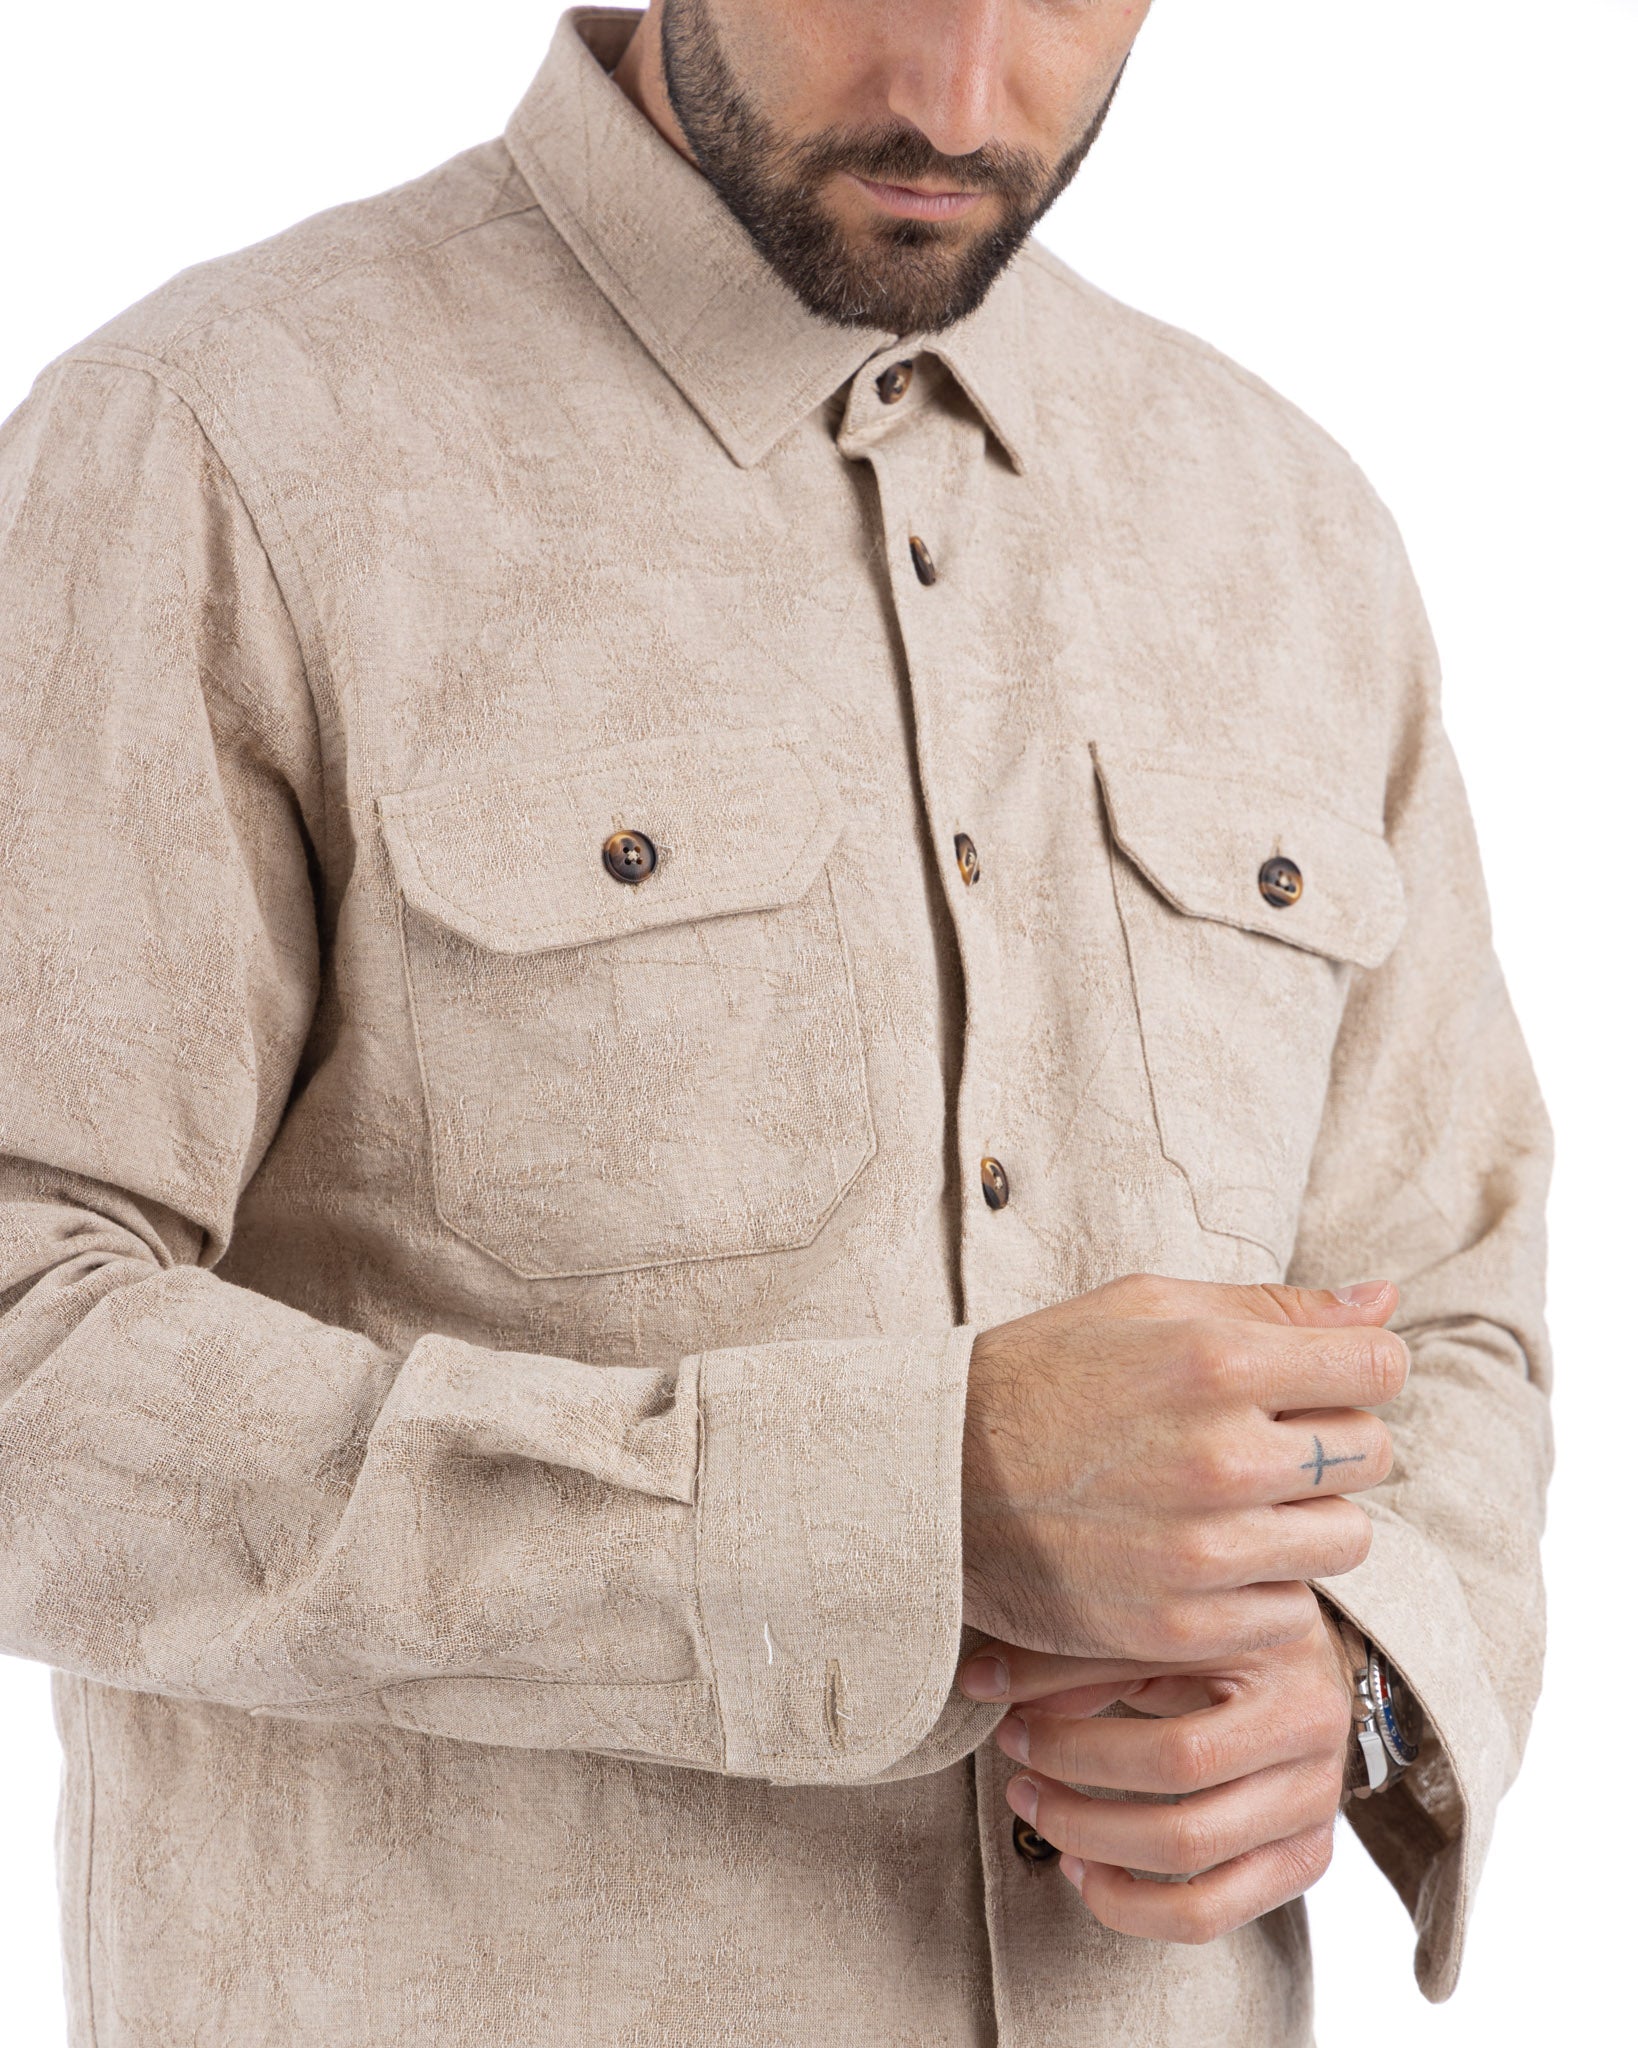 Bahama - twine shirt with relief pattern